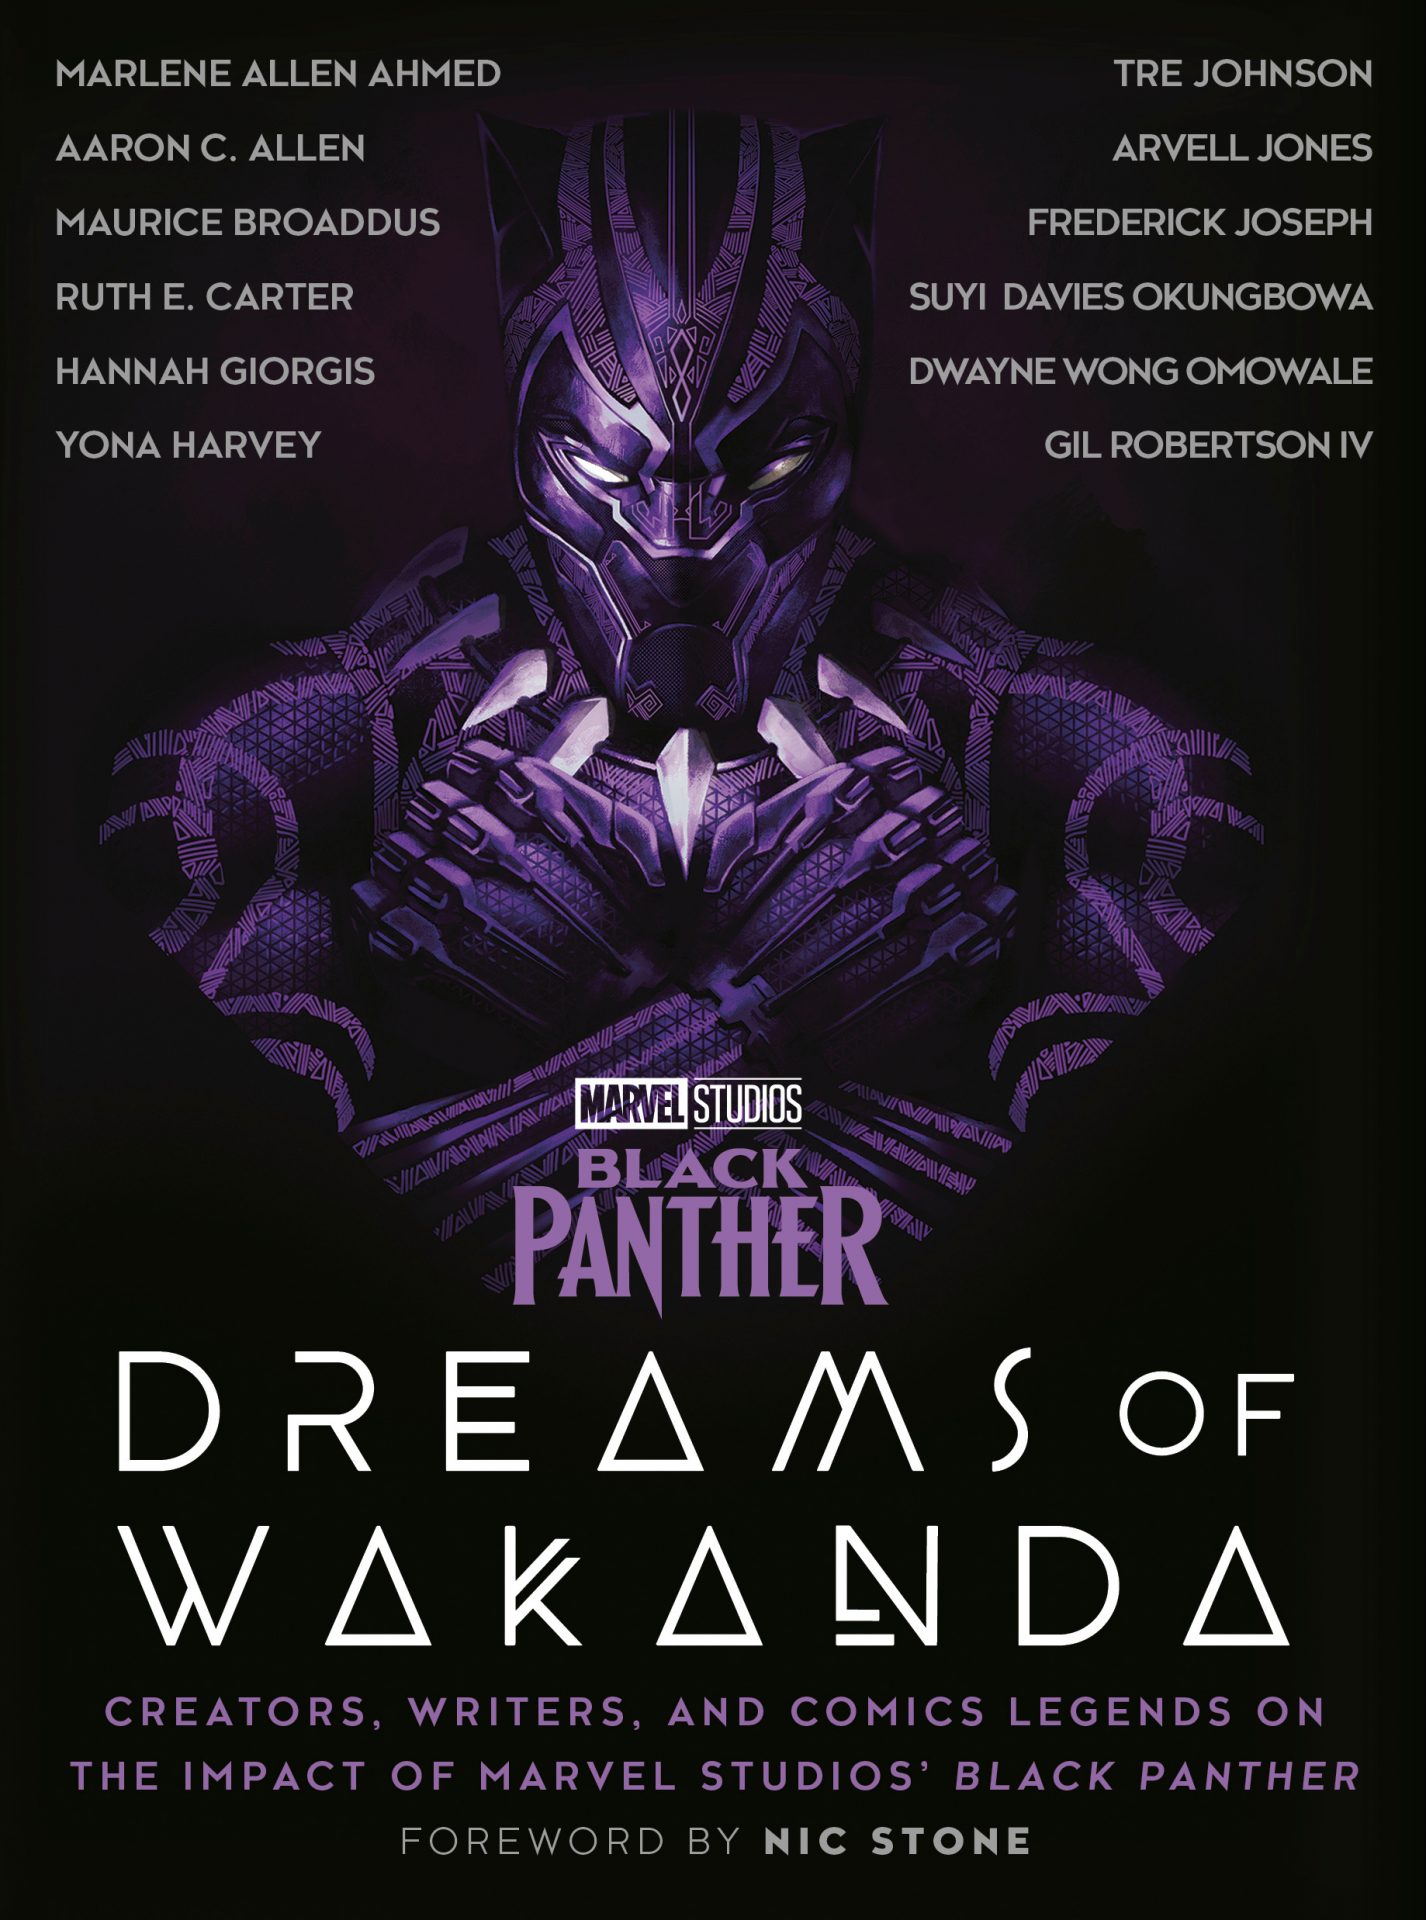 The cover of the book Black Panther: Dreams of Wakanda featuring the Black Panther in purple